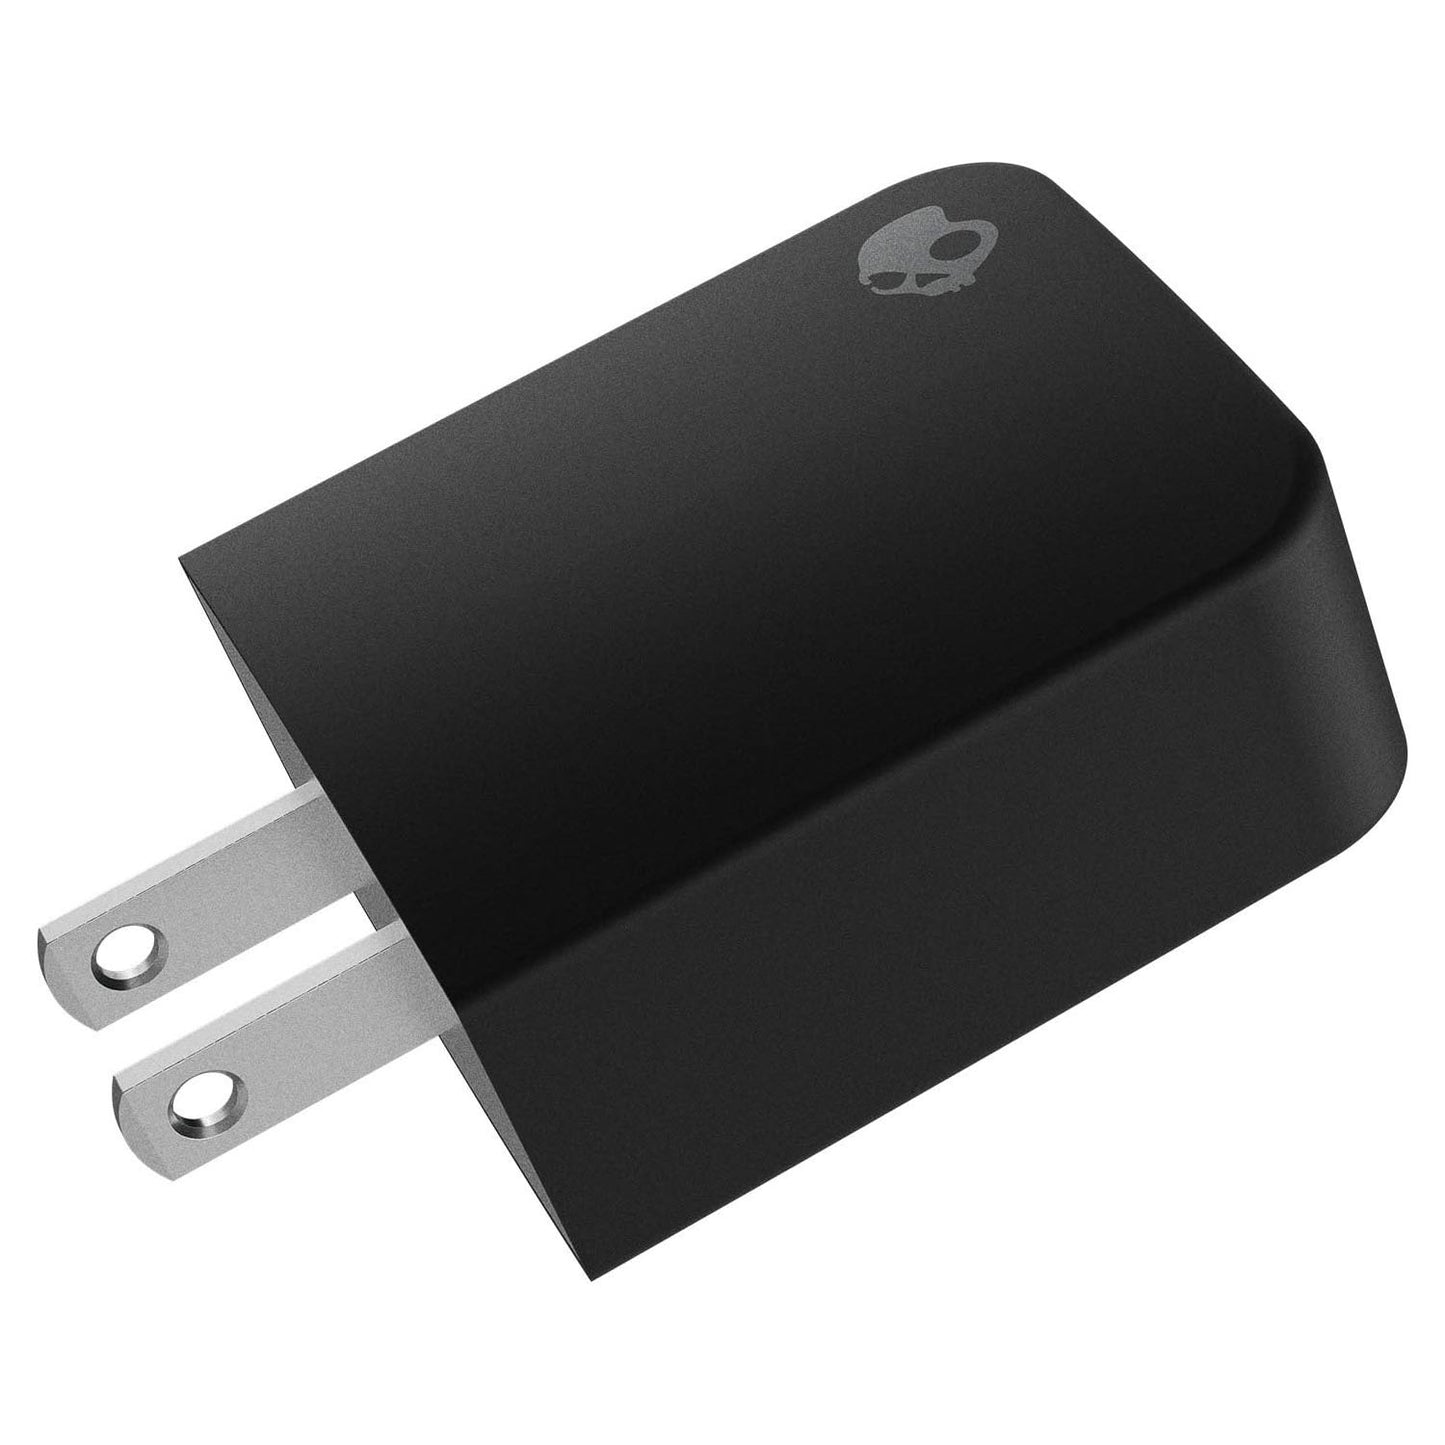 Skullcandy Fix USB 12W AC Wall Charger Adapter Fast Charging with Single USB-A Port for Smartphones, Headphones, Tablets